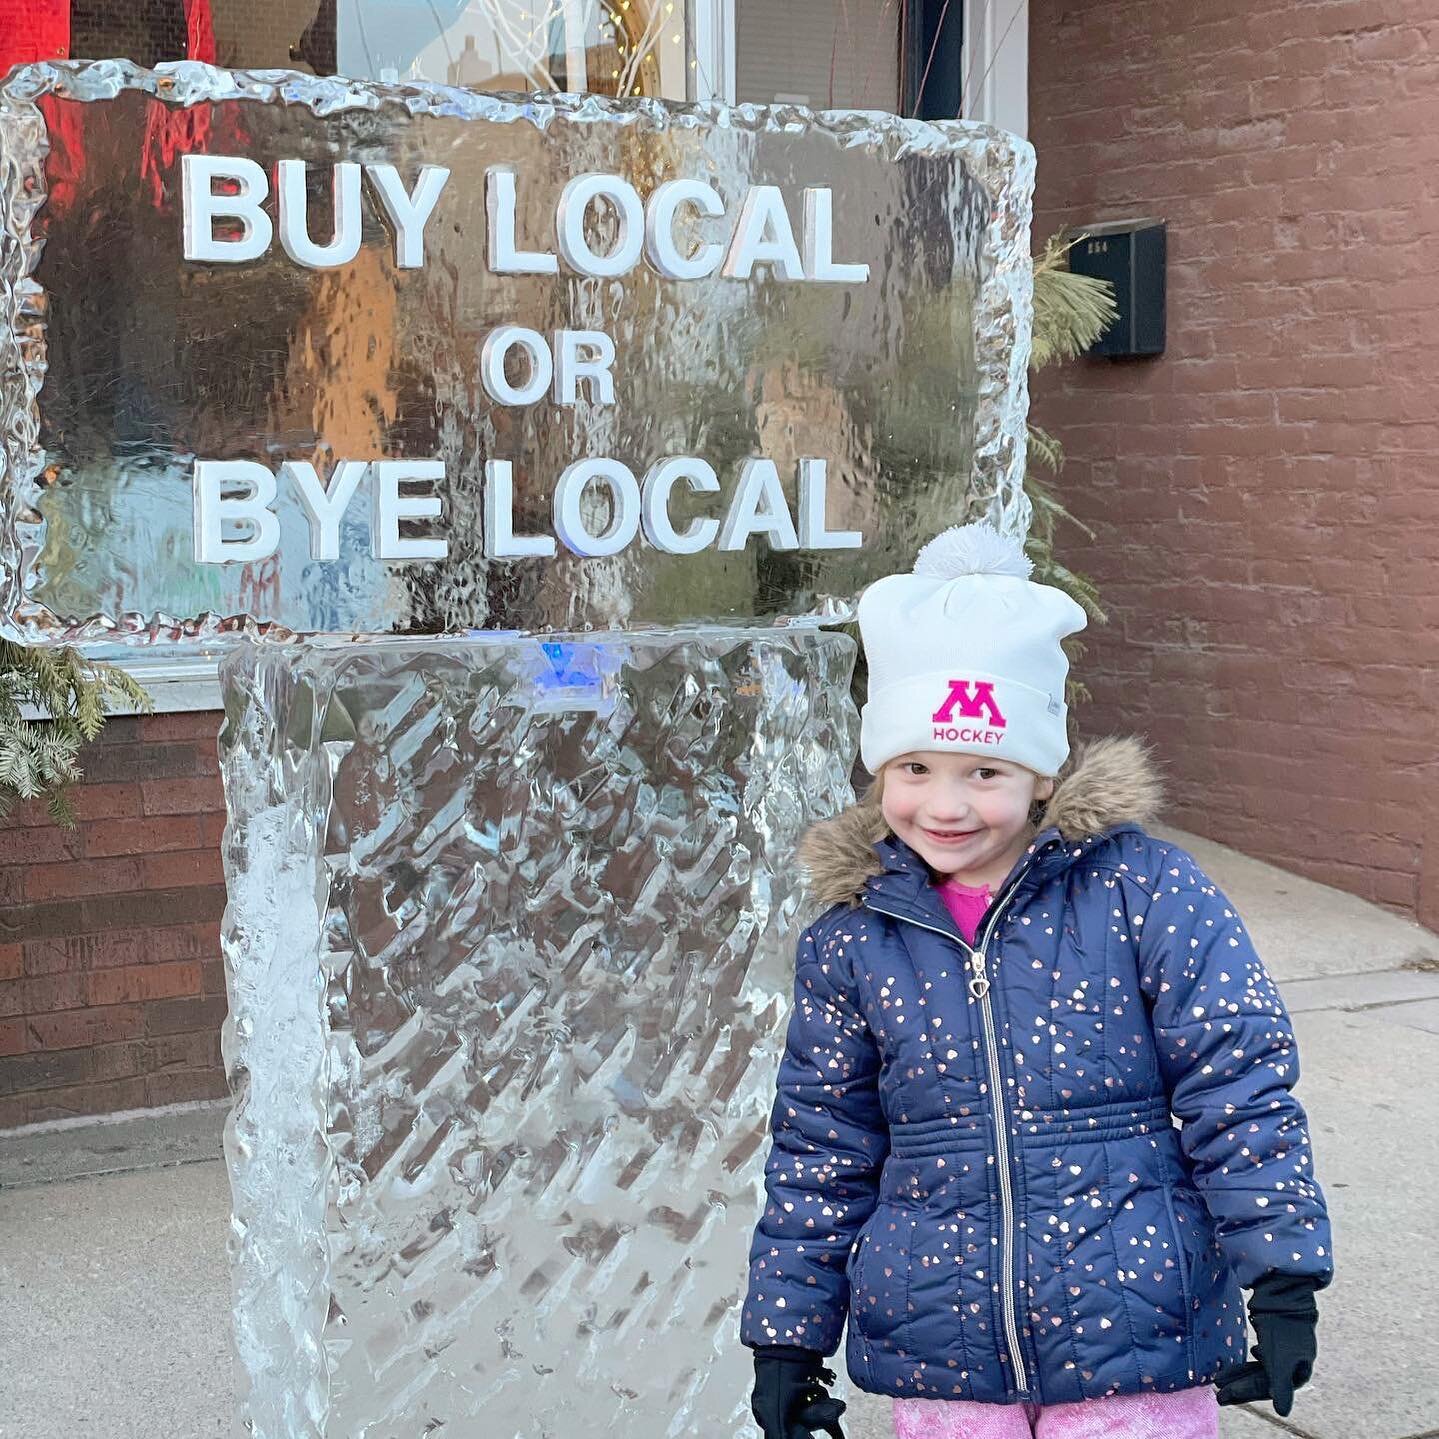 We found sculpture #7 from @getknitevents!!!
❤️
I agree, support local!
🥳
These sculptures are so cool. Delia was amazed by it. Such great work. We&rsquo;ll be looking for more.
.
.
.
#supportsmallbusiness #mnsmallbusiness #mnmaker #excelsior #excel